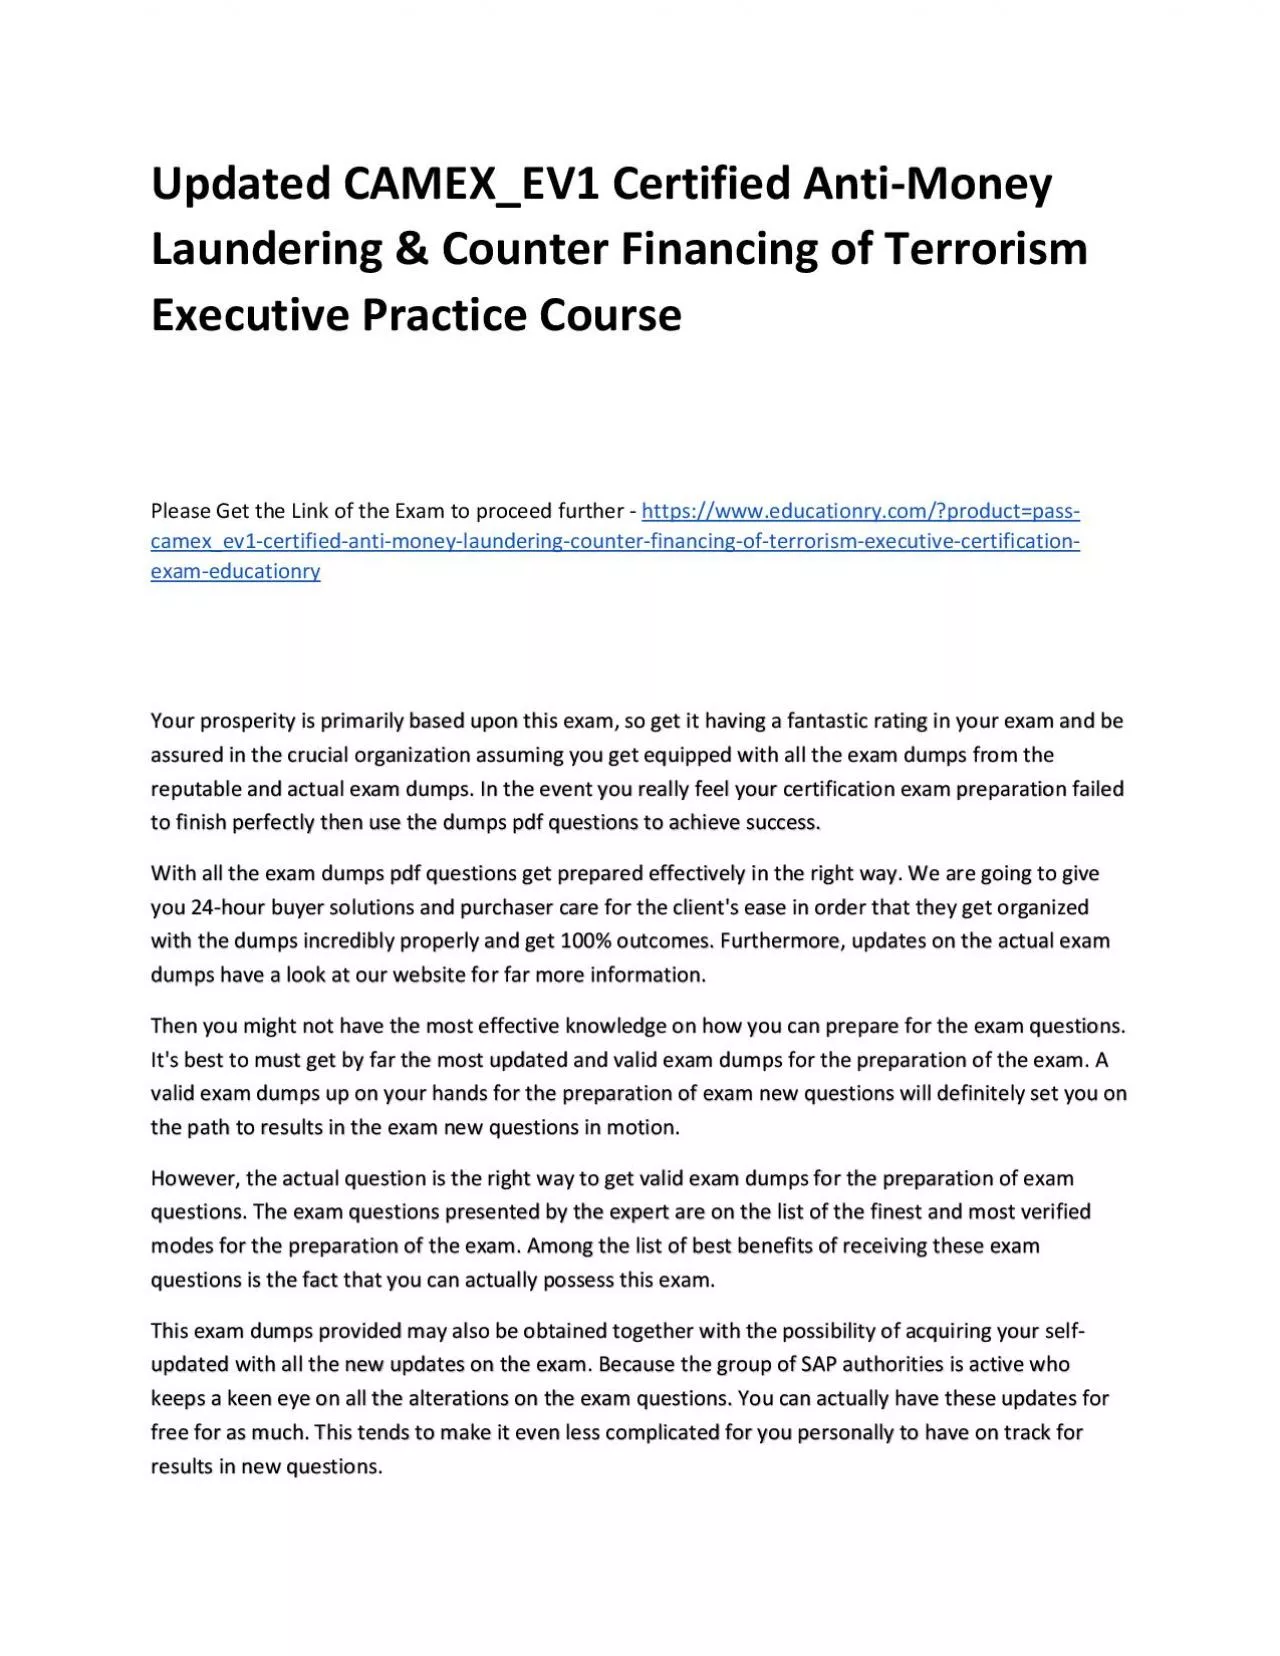 Updated CAMEX_EV1 Certified Anti-Money Laundering & Counter Financing of Terrorism Executive